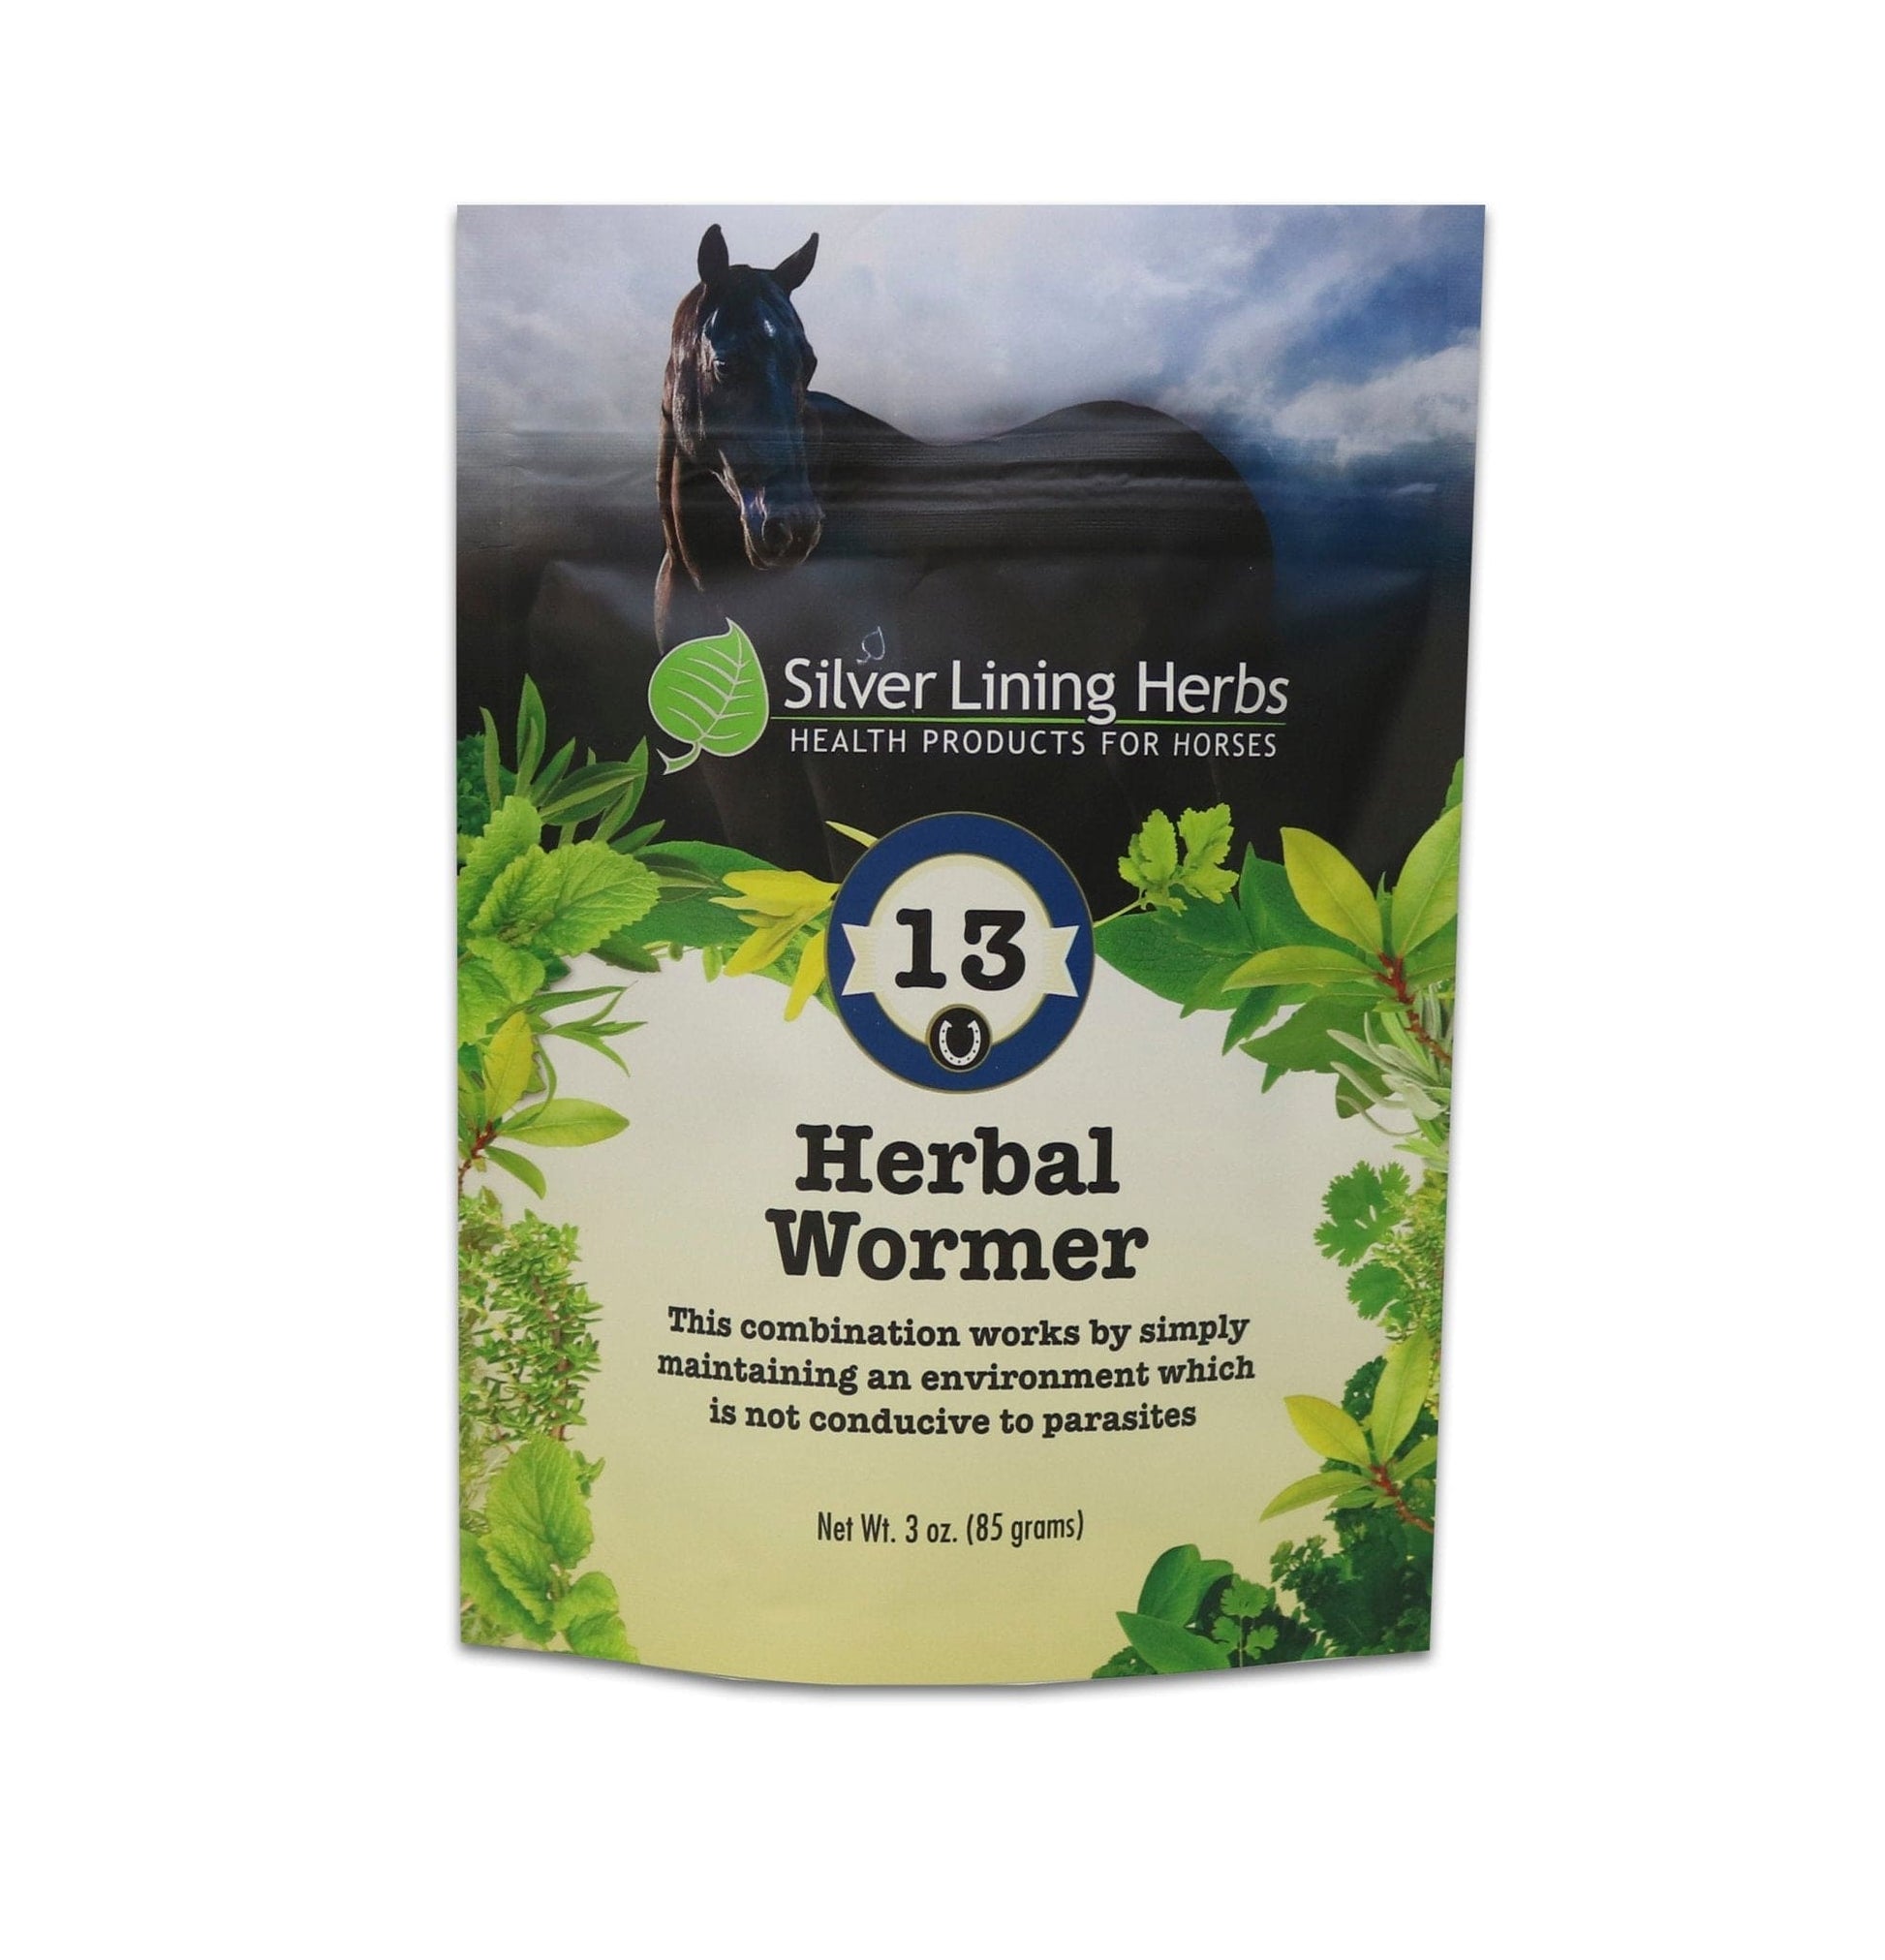 Herbal Wormer for Horses - Silver Lining Herbs